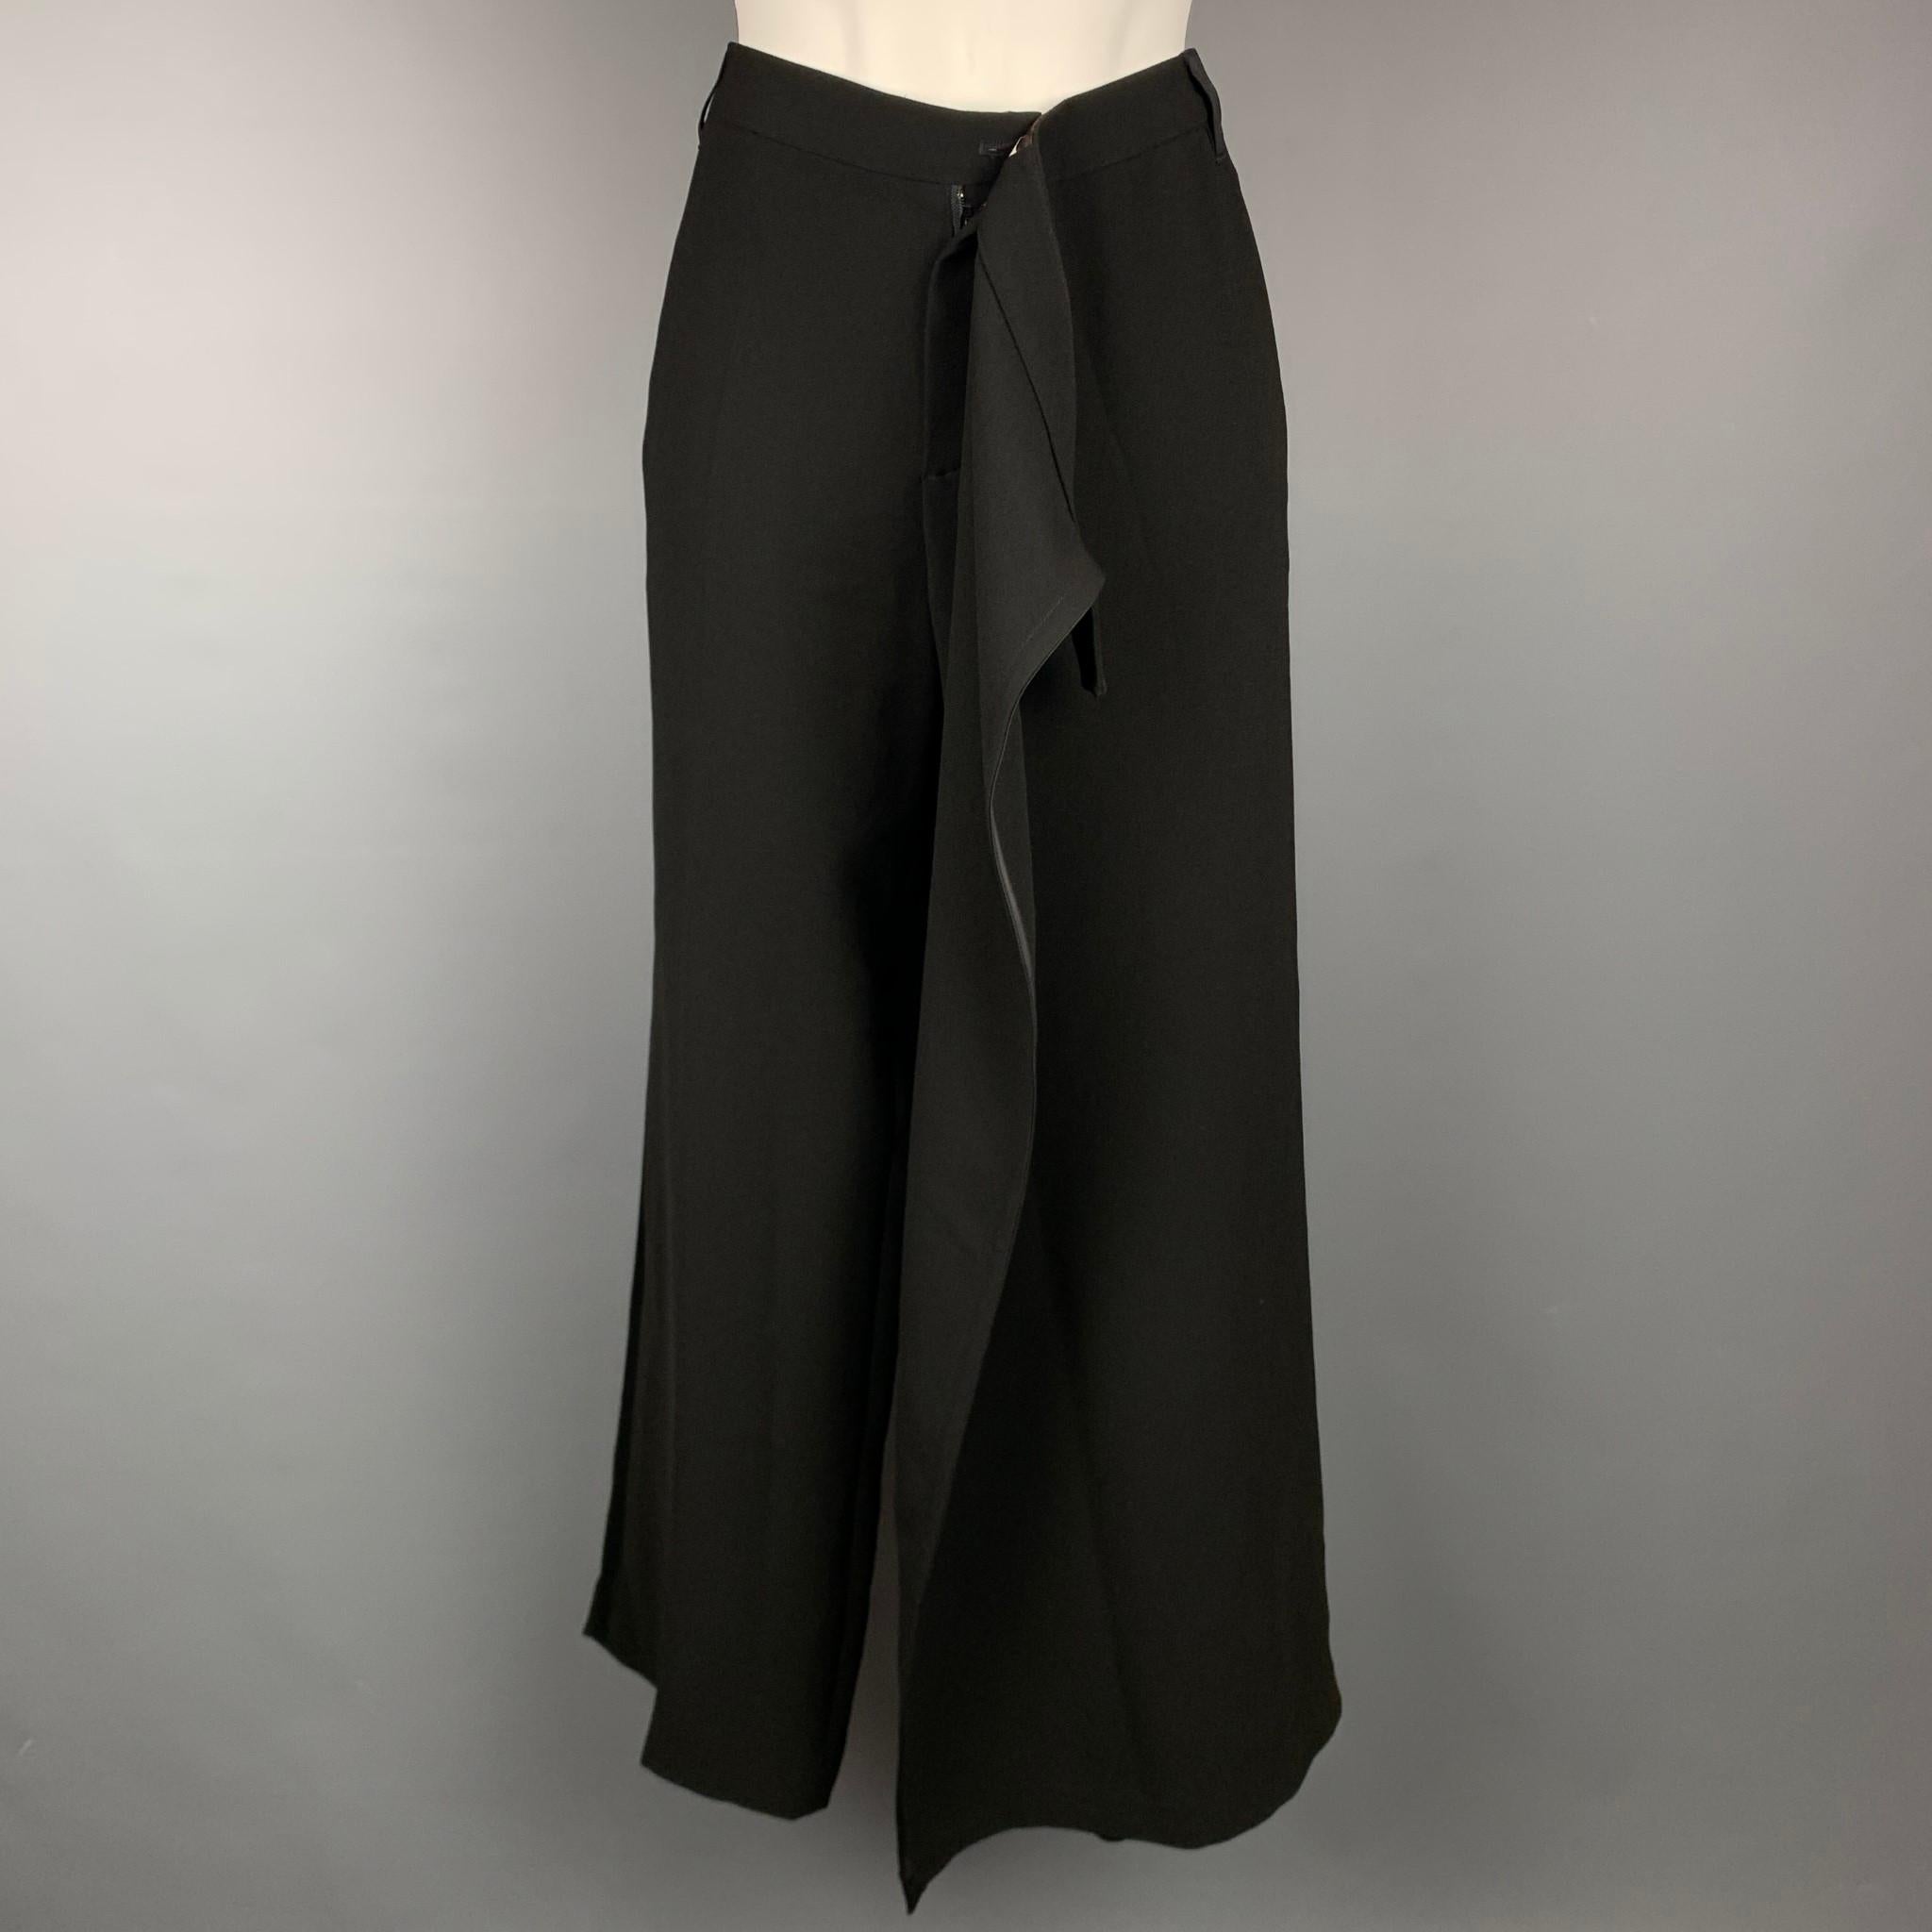 Vintage JEAN PAUL GAULTIER dress pants comes in a black triacetate blend with a skirt panel design, wide leg, side button detail, front tab, and a zip fly closure. Made in Italy.

Very Good Pre-Owned Condition.
Marked: S

Measurements:

Waist: 32